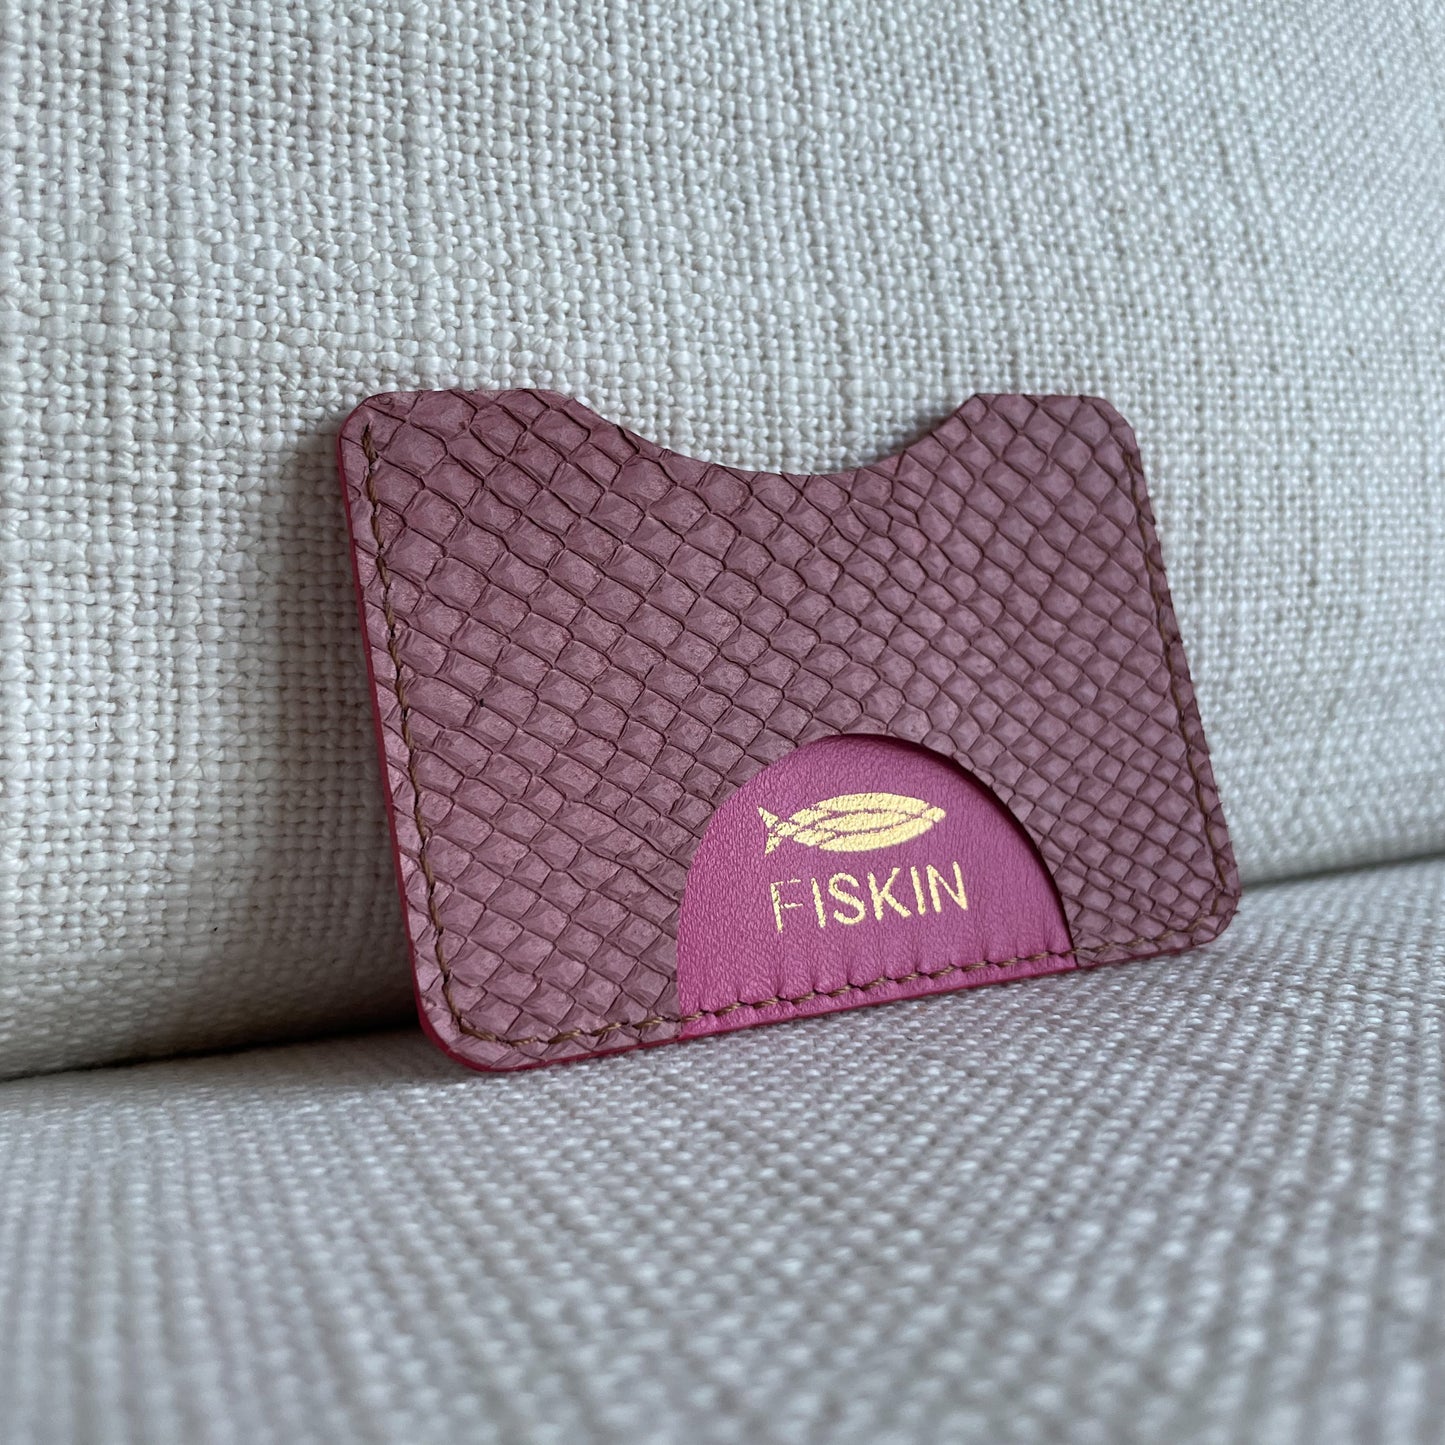 Fish leather cardholder, sun touch collection, lilac color